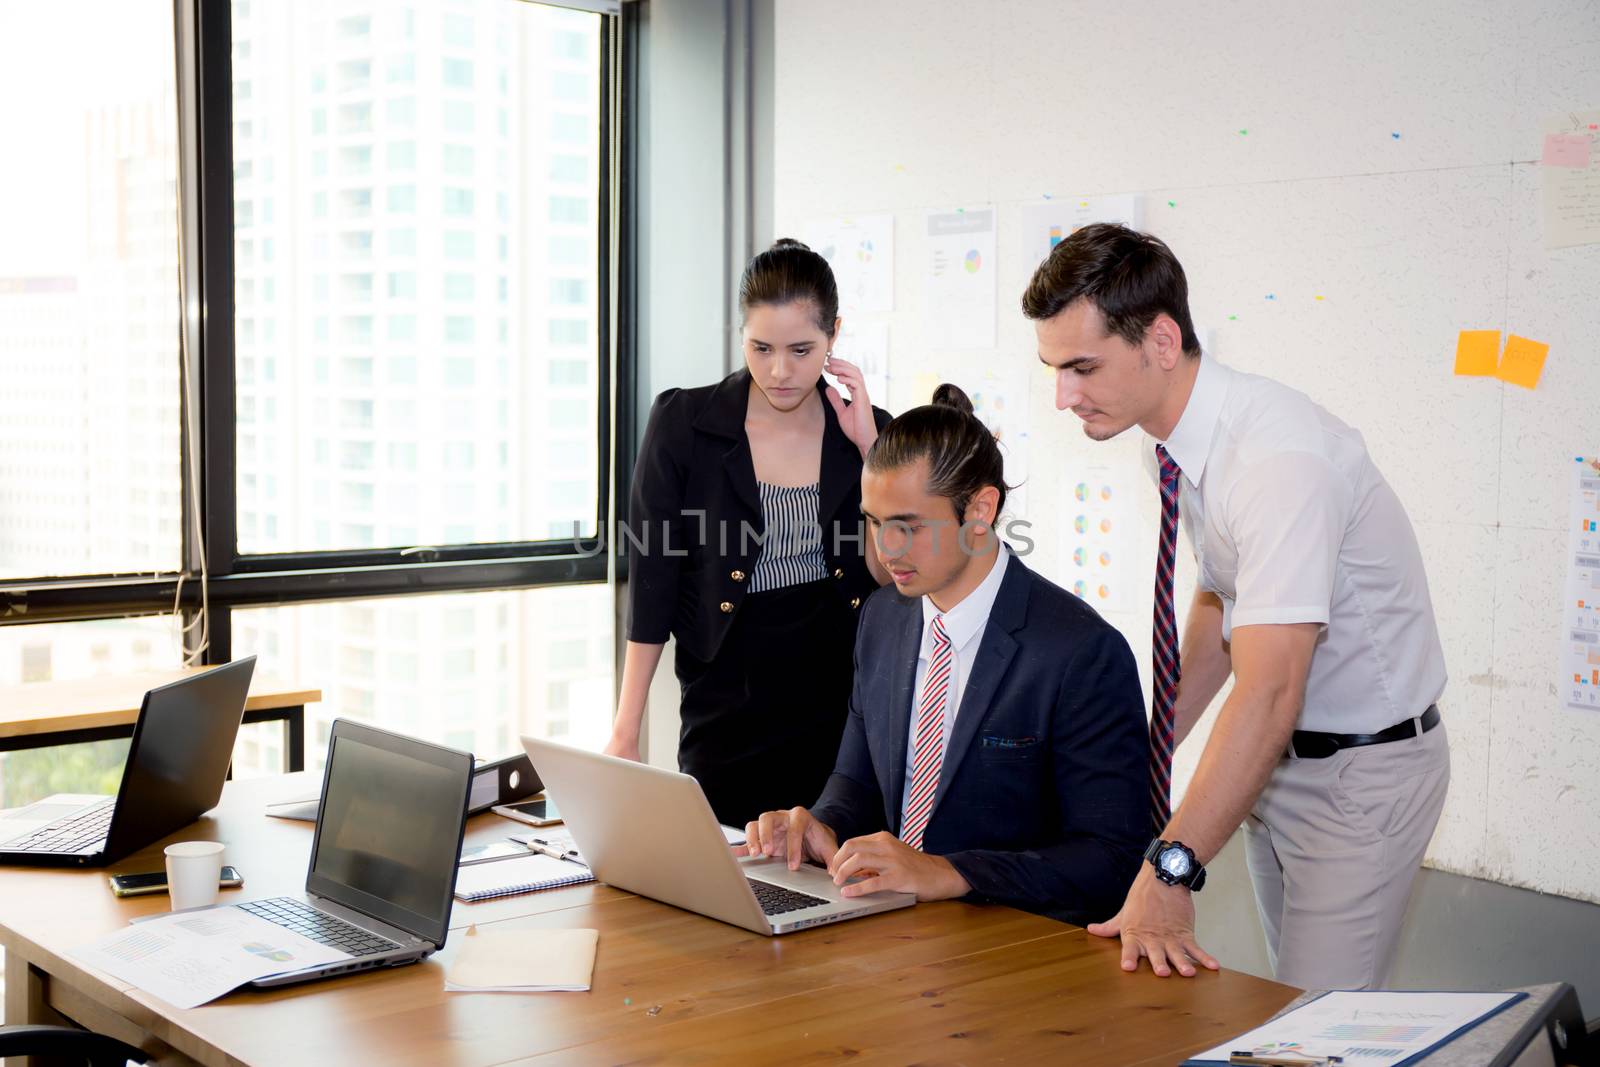 American people business team having using laptop during a meeting and presents.